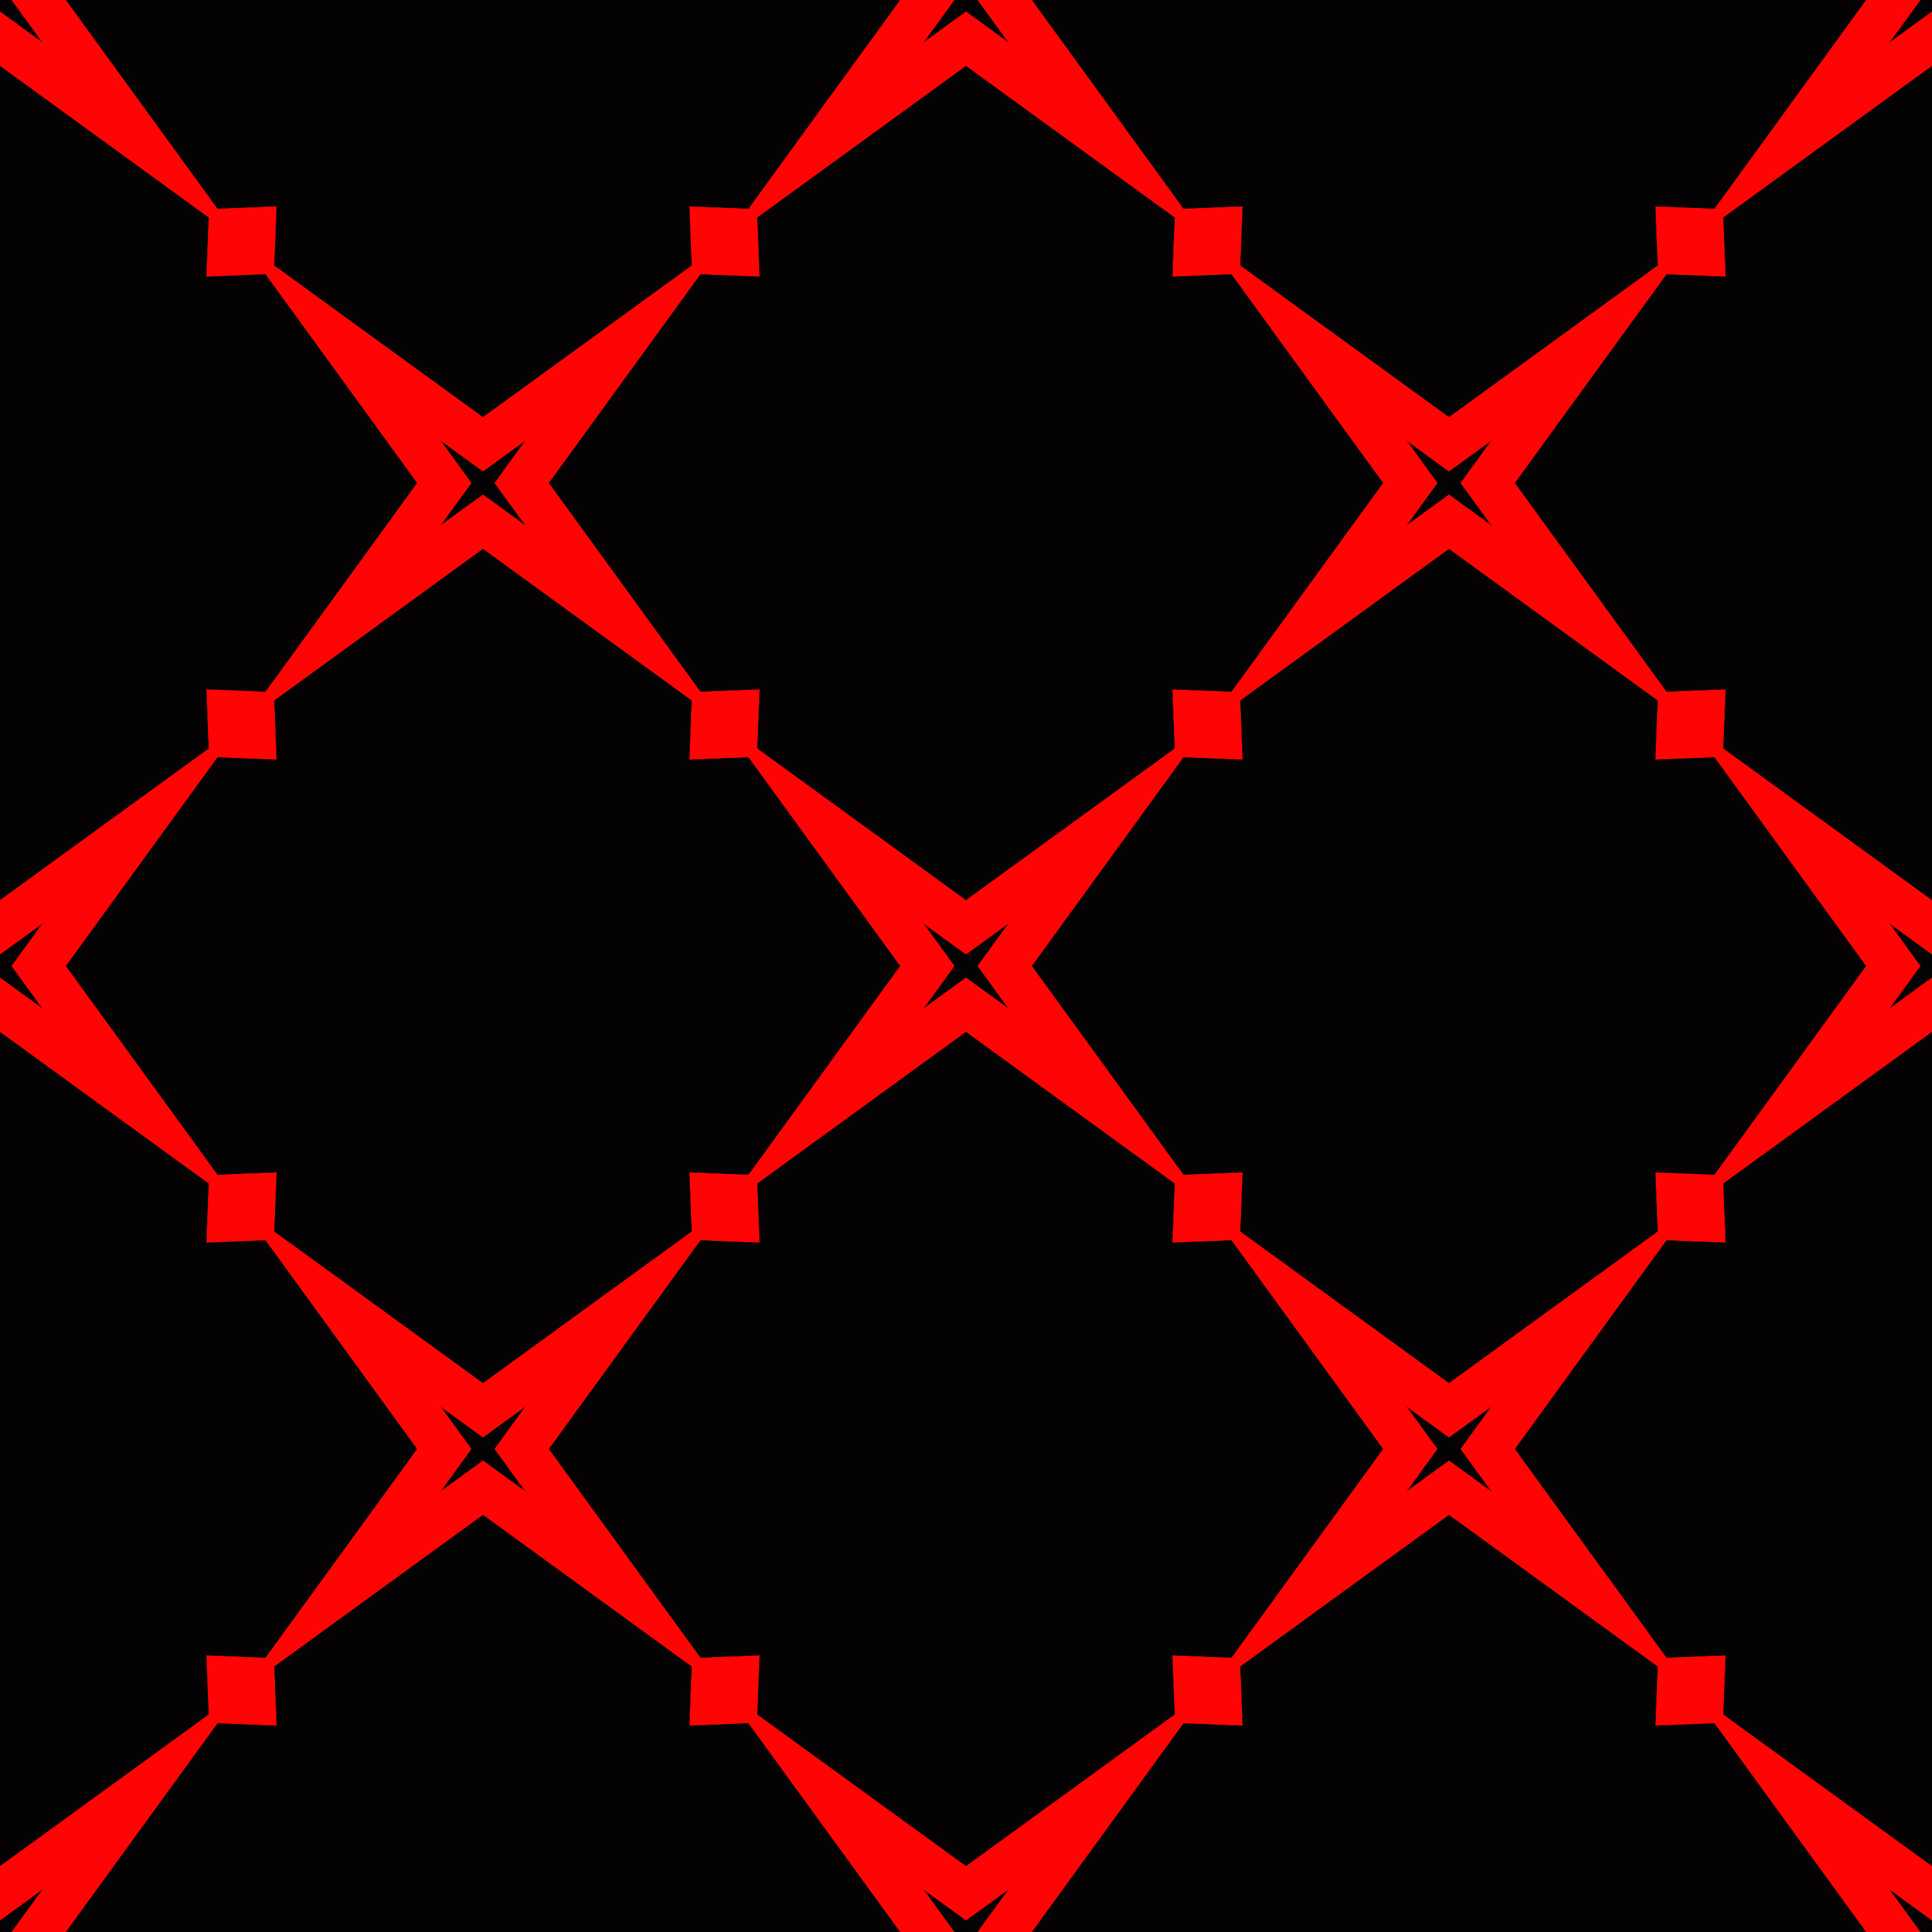 grid, red, abstract, pattern, texture, textures, symmetry